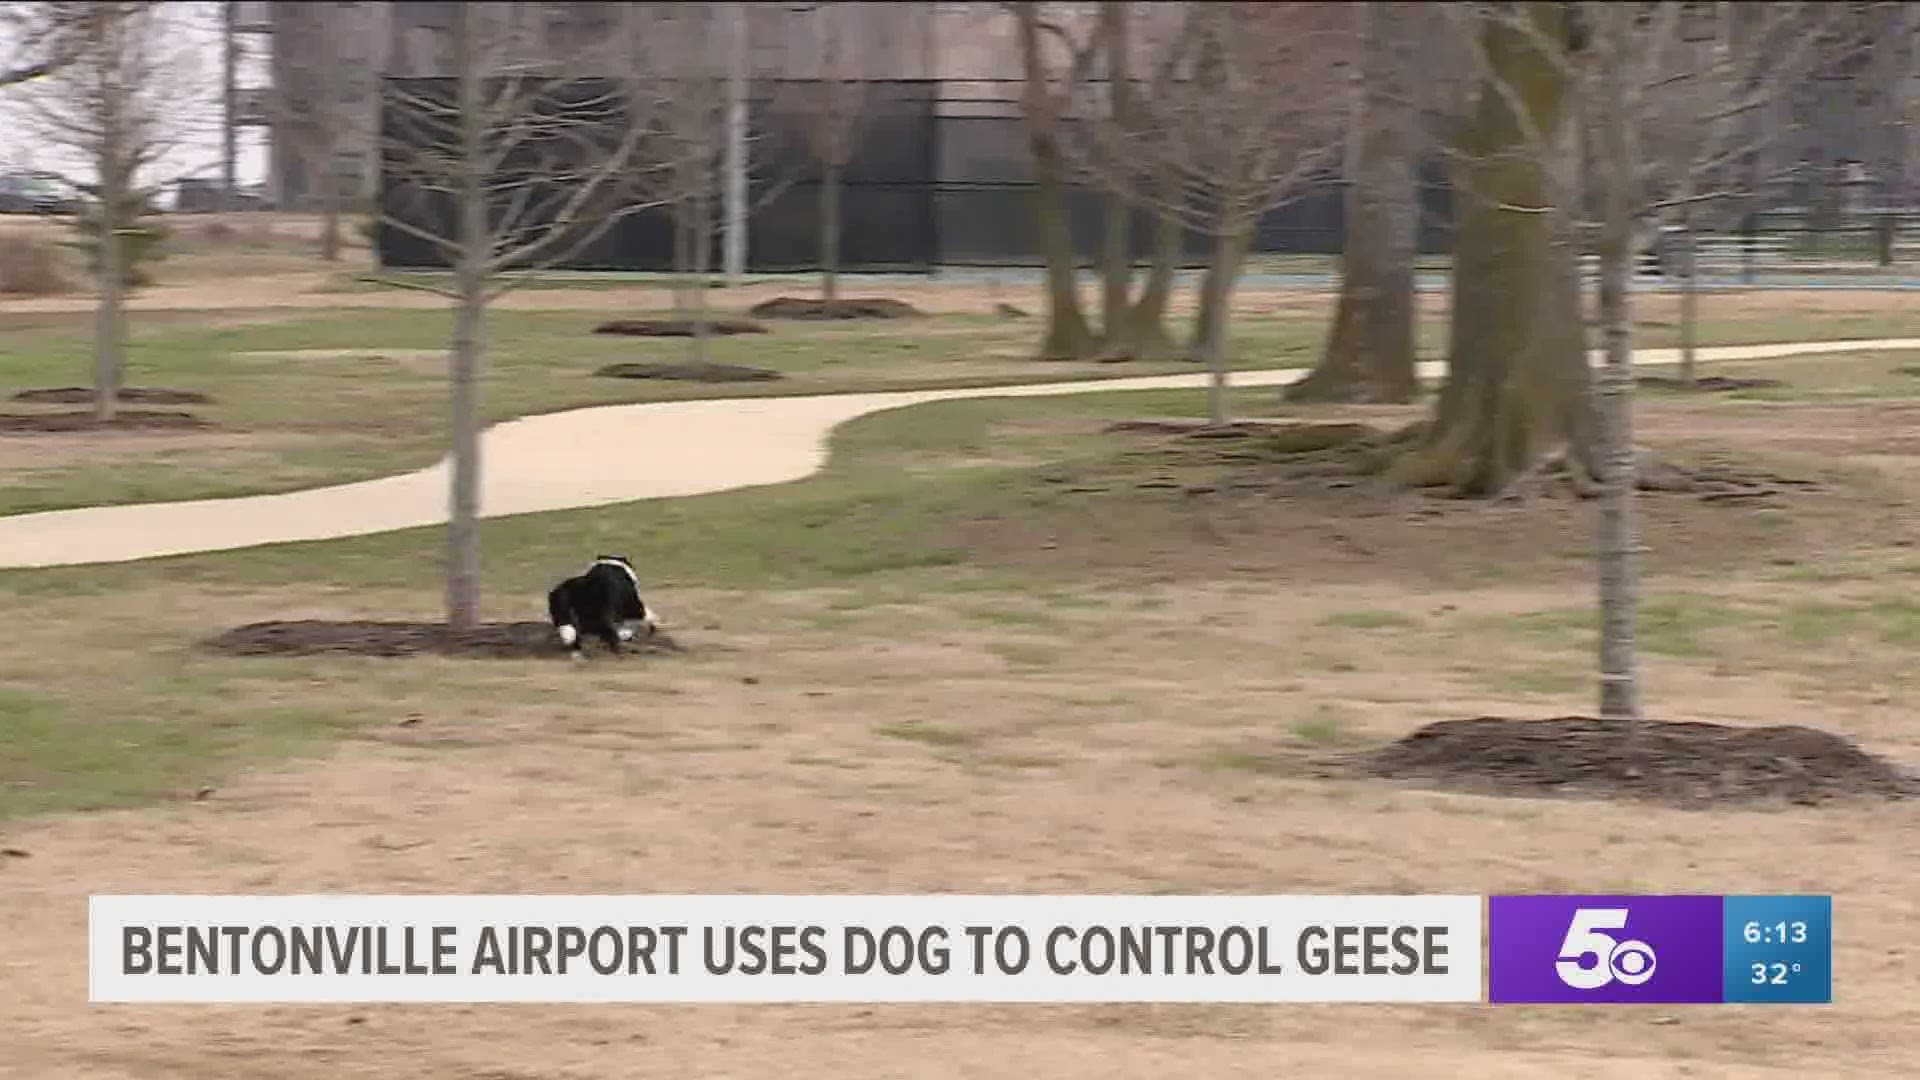 Bentonville Aiport uses dog to control geese